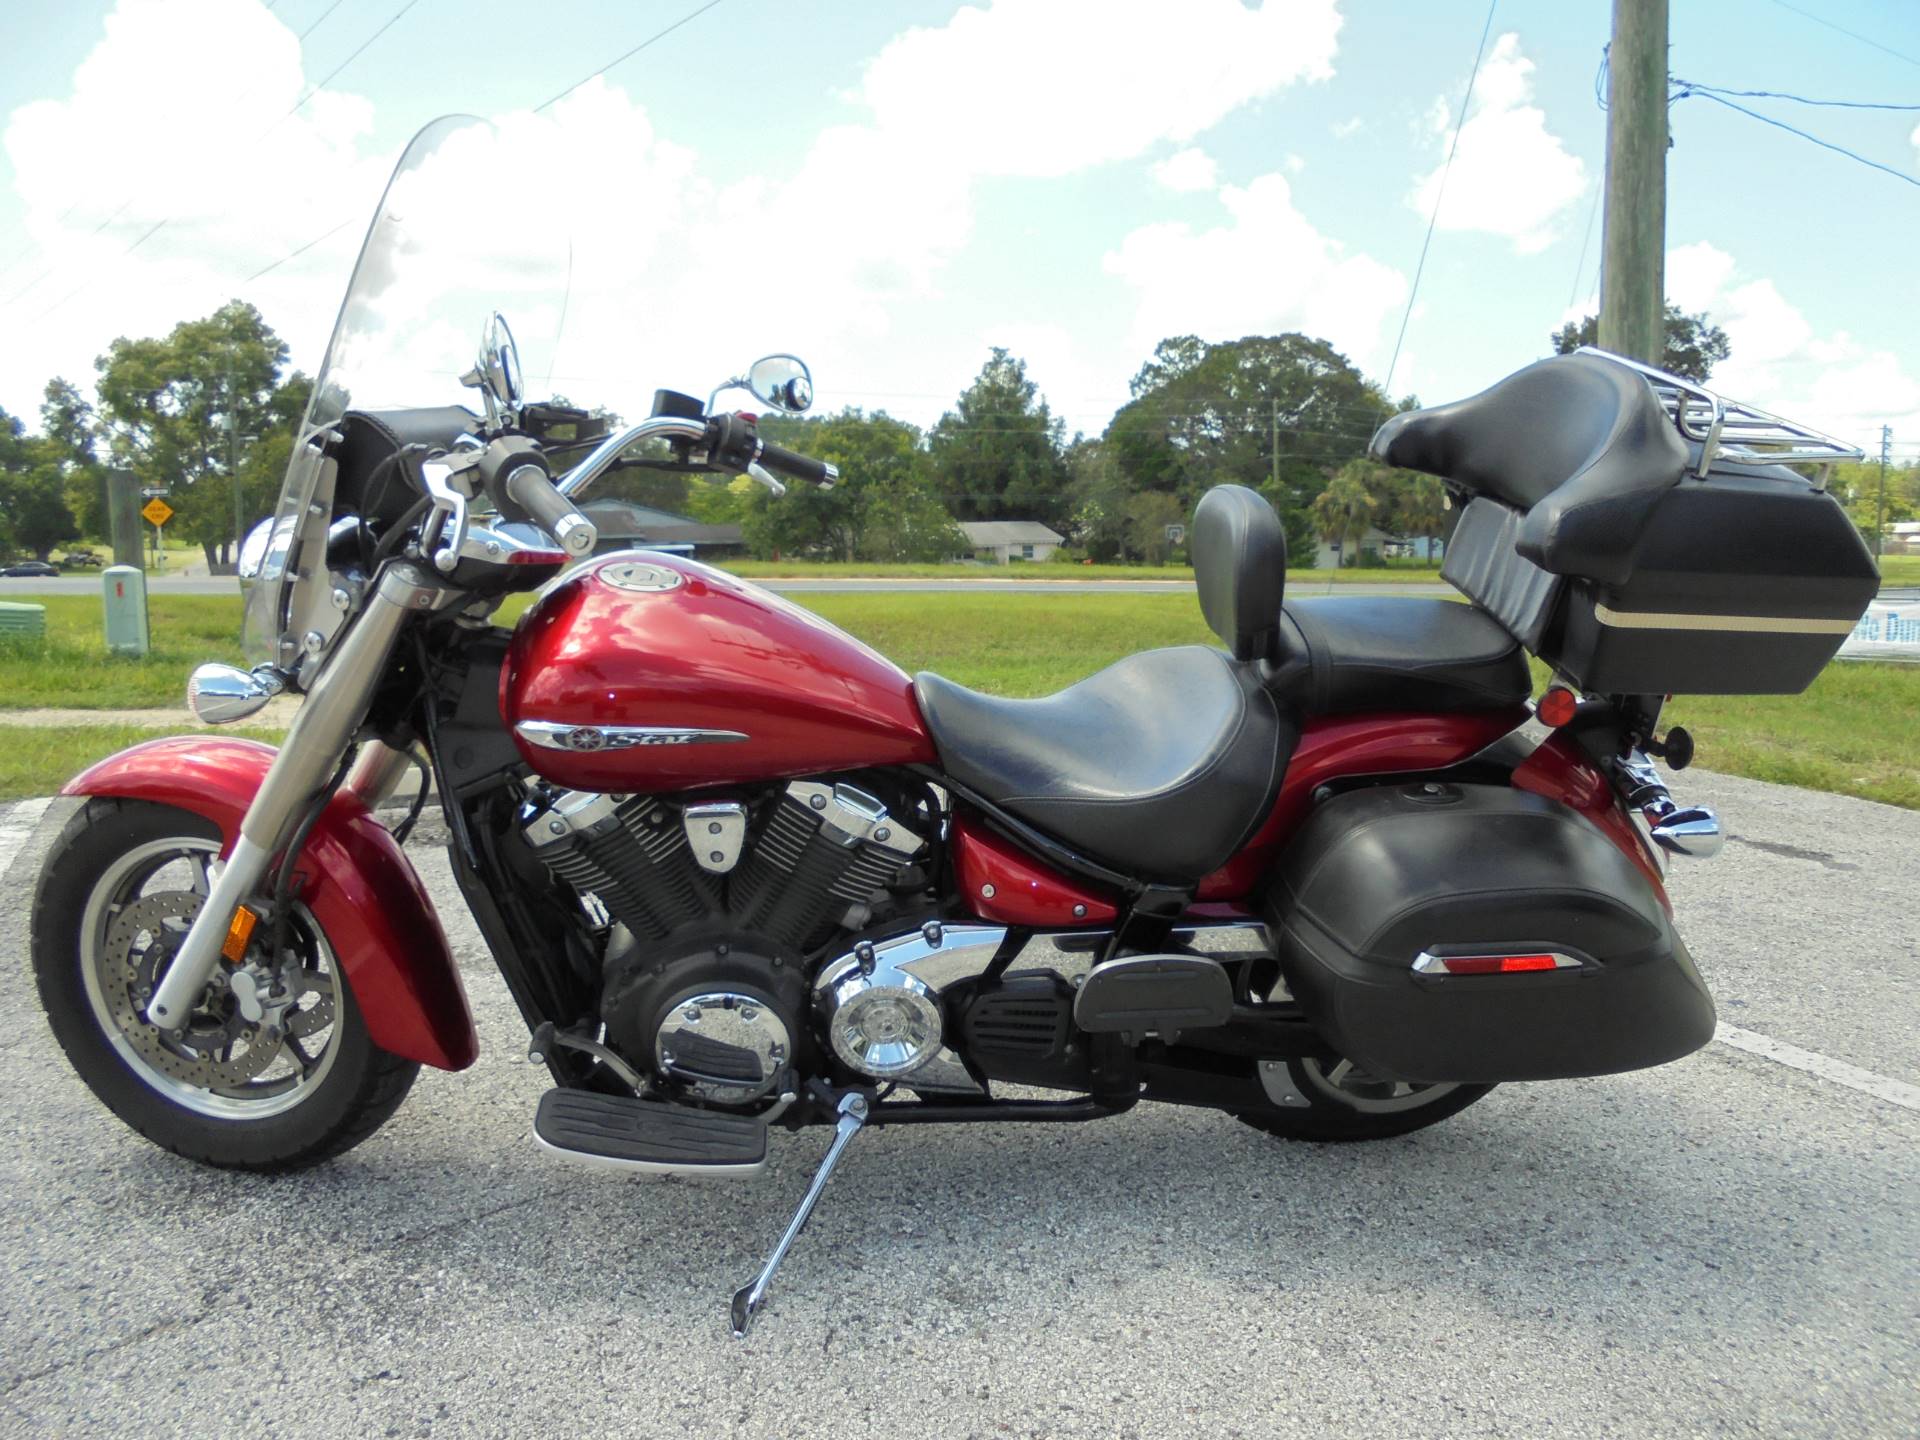 Used 2012 Yamaha V Star 1300 Candy Red Motorcycles In Zephyrhills Fl Yam000389